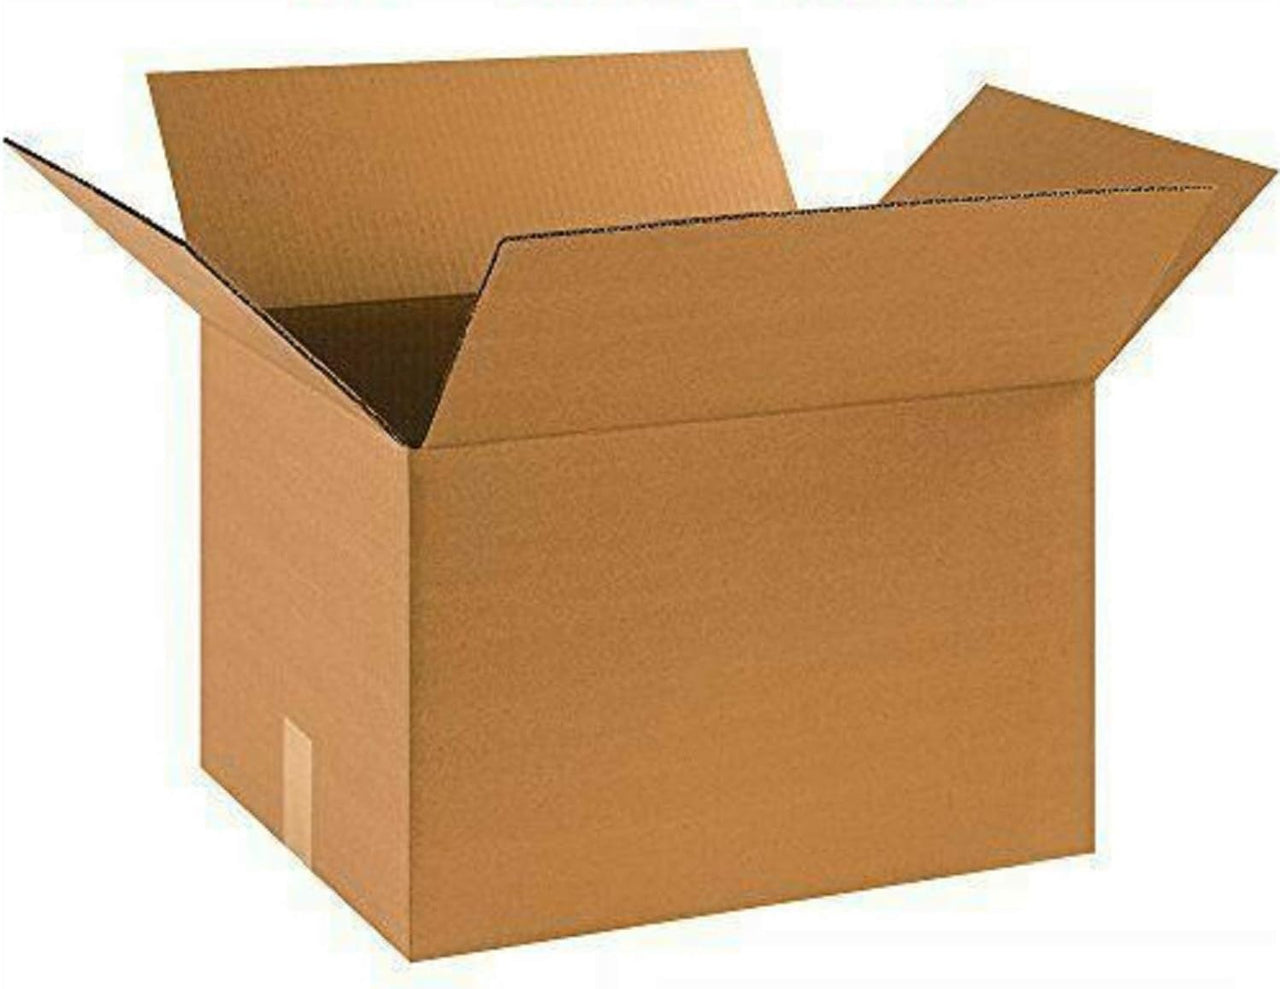 25 Pack Shipping Boxes 16"L x 16"W x 16"H Corrugated Cardboard Box for Packing Moving Storage